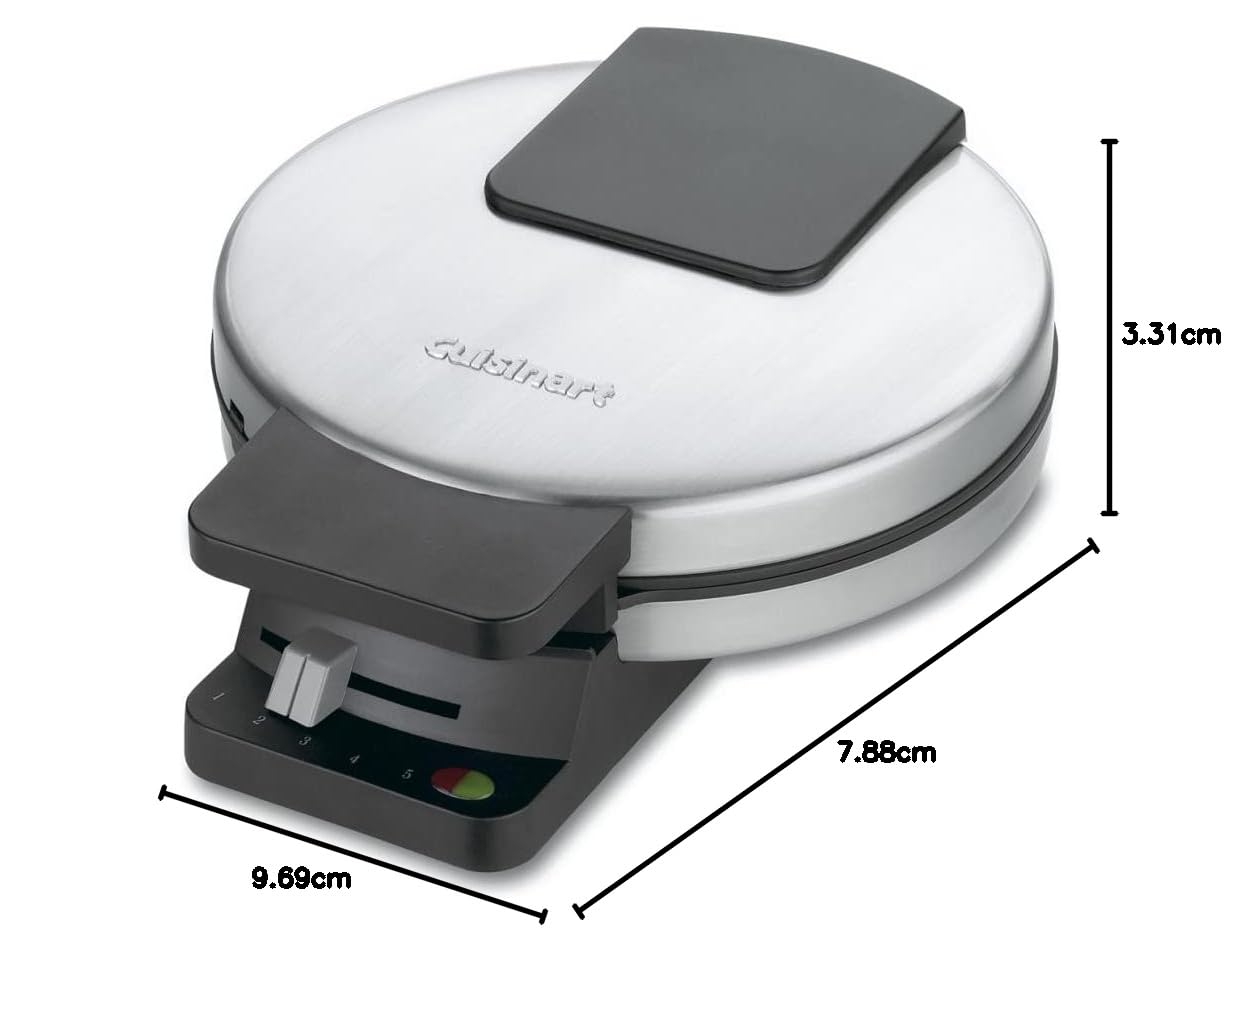 Cuisinart WMR-CAP2 Round Classic Waffle Maker, Brushed Stainless,Silver